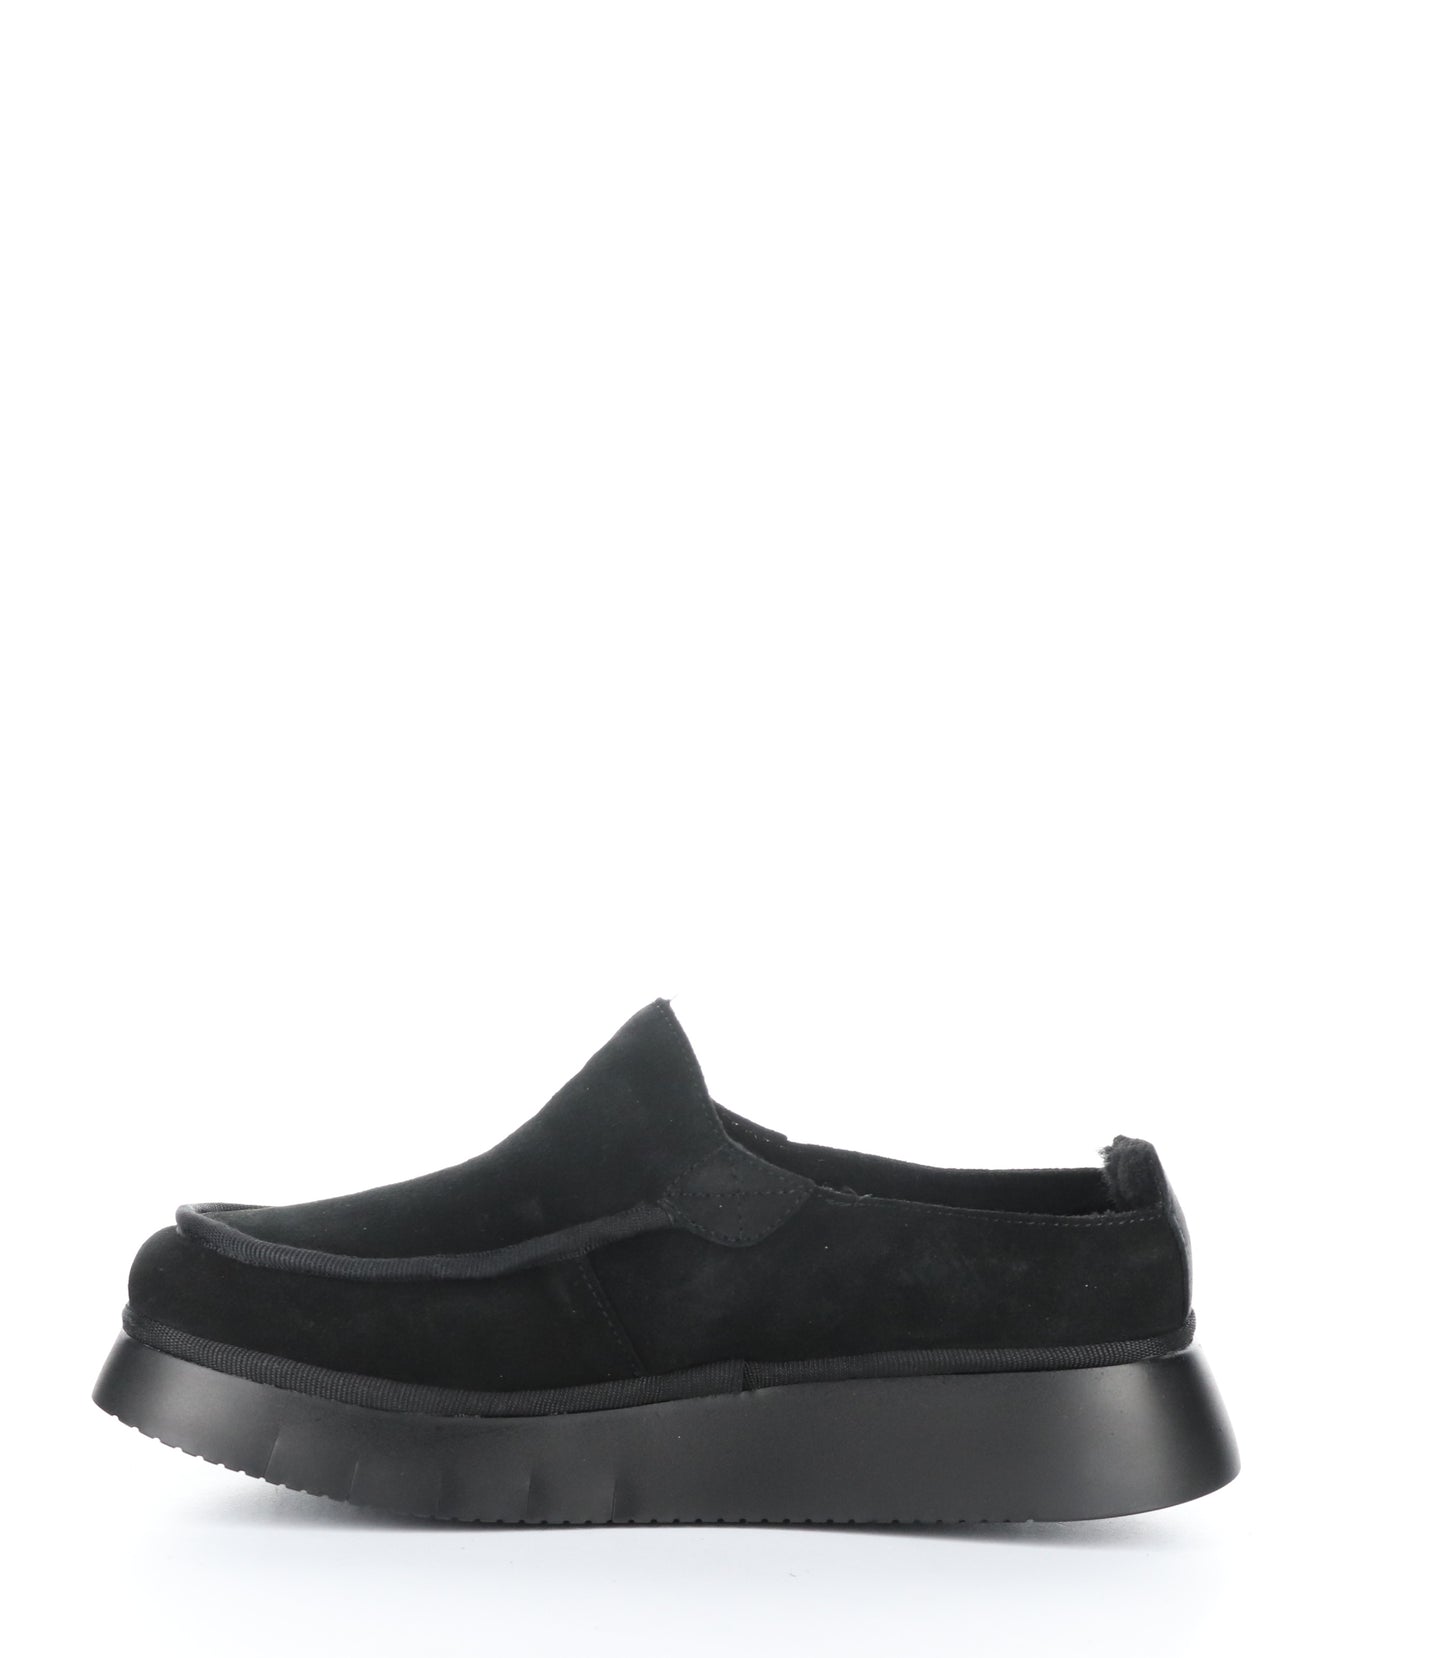 The left profile view of a black suede slip on shoe